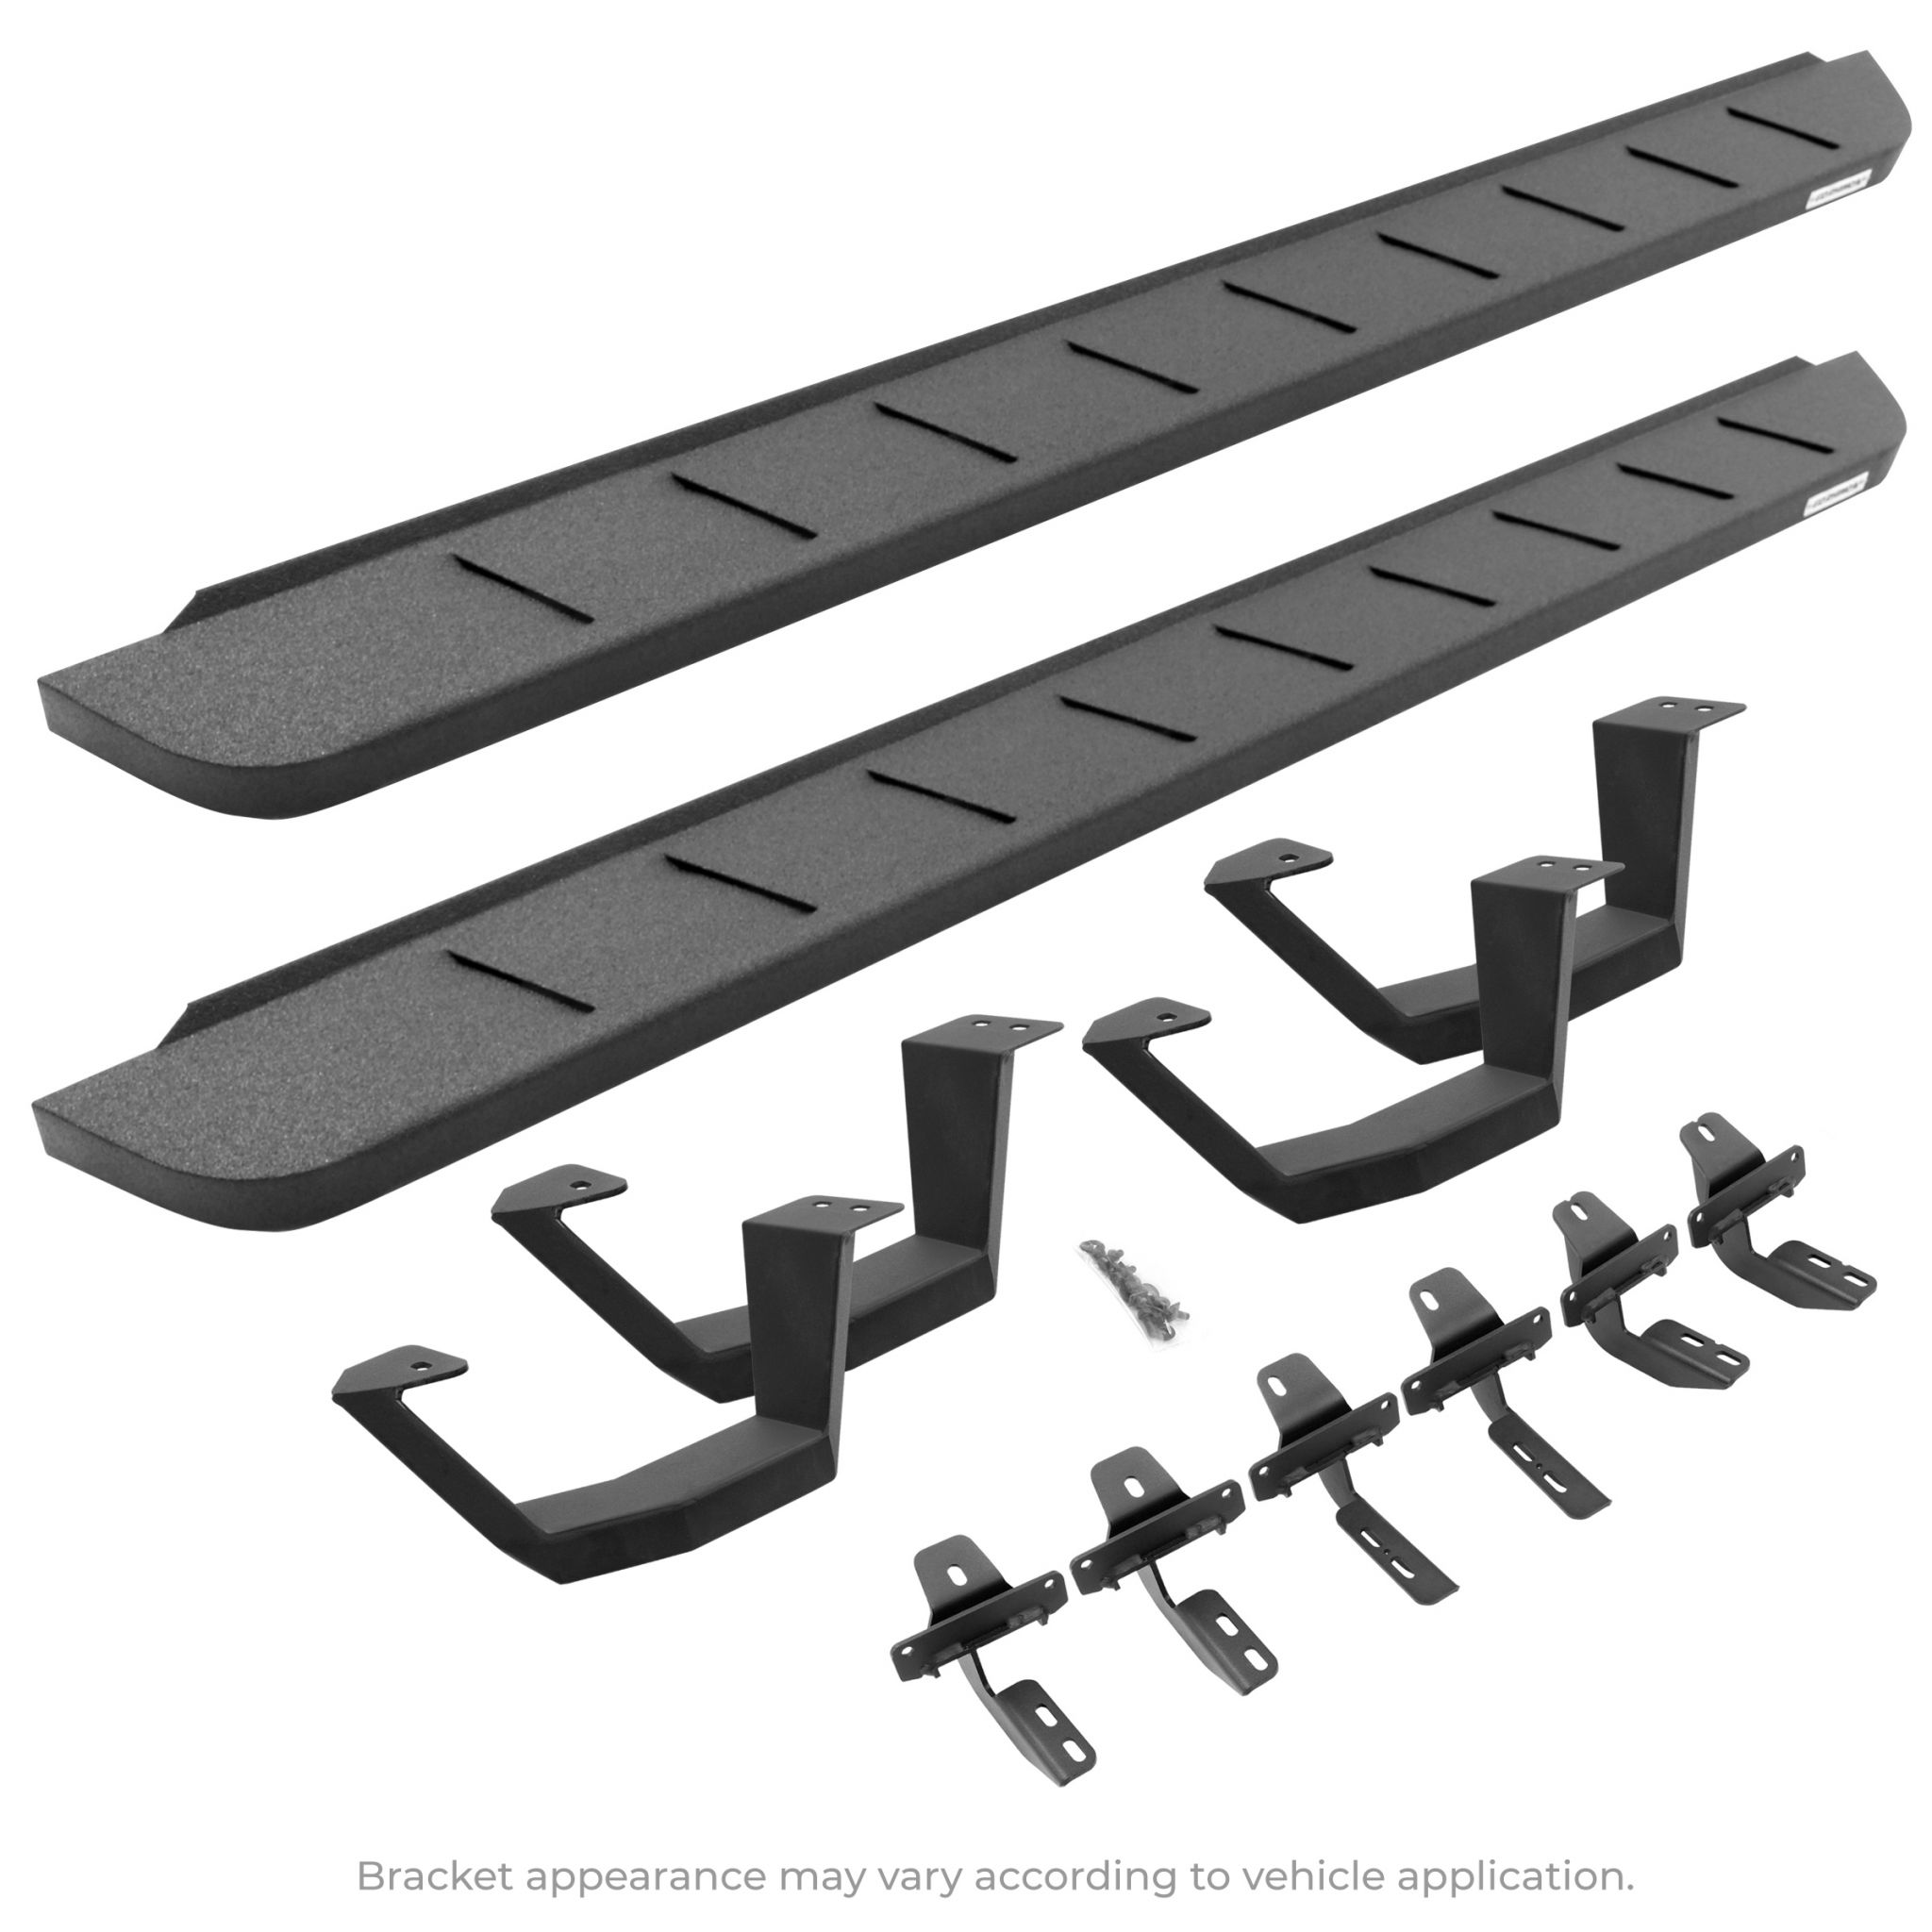 Go Rhino 6344358020T - RB10 Running Boards With Mounting Brackets & 2 Pairs of Drop Steps Kit - Protective Bedliner Coating